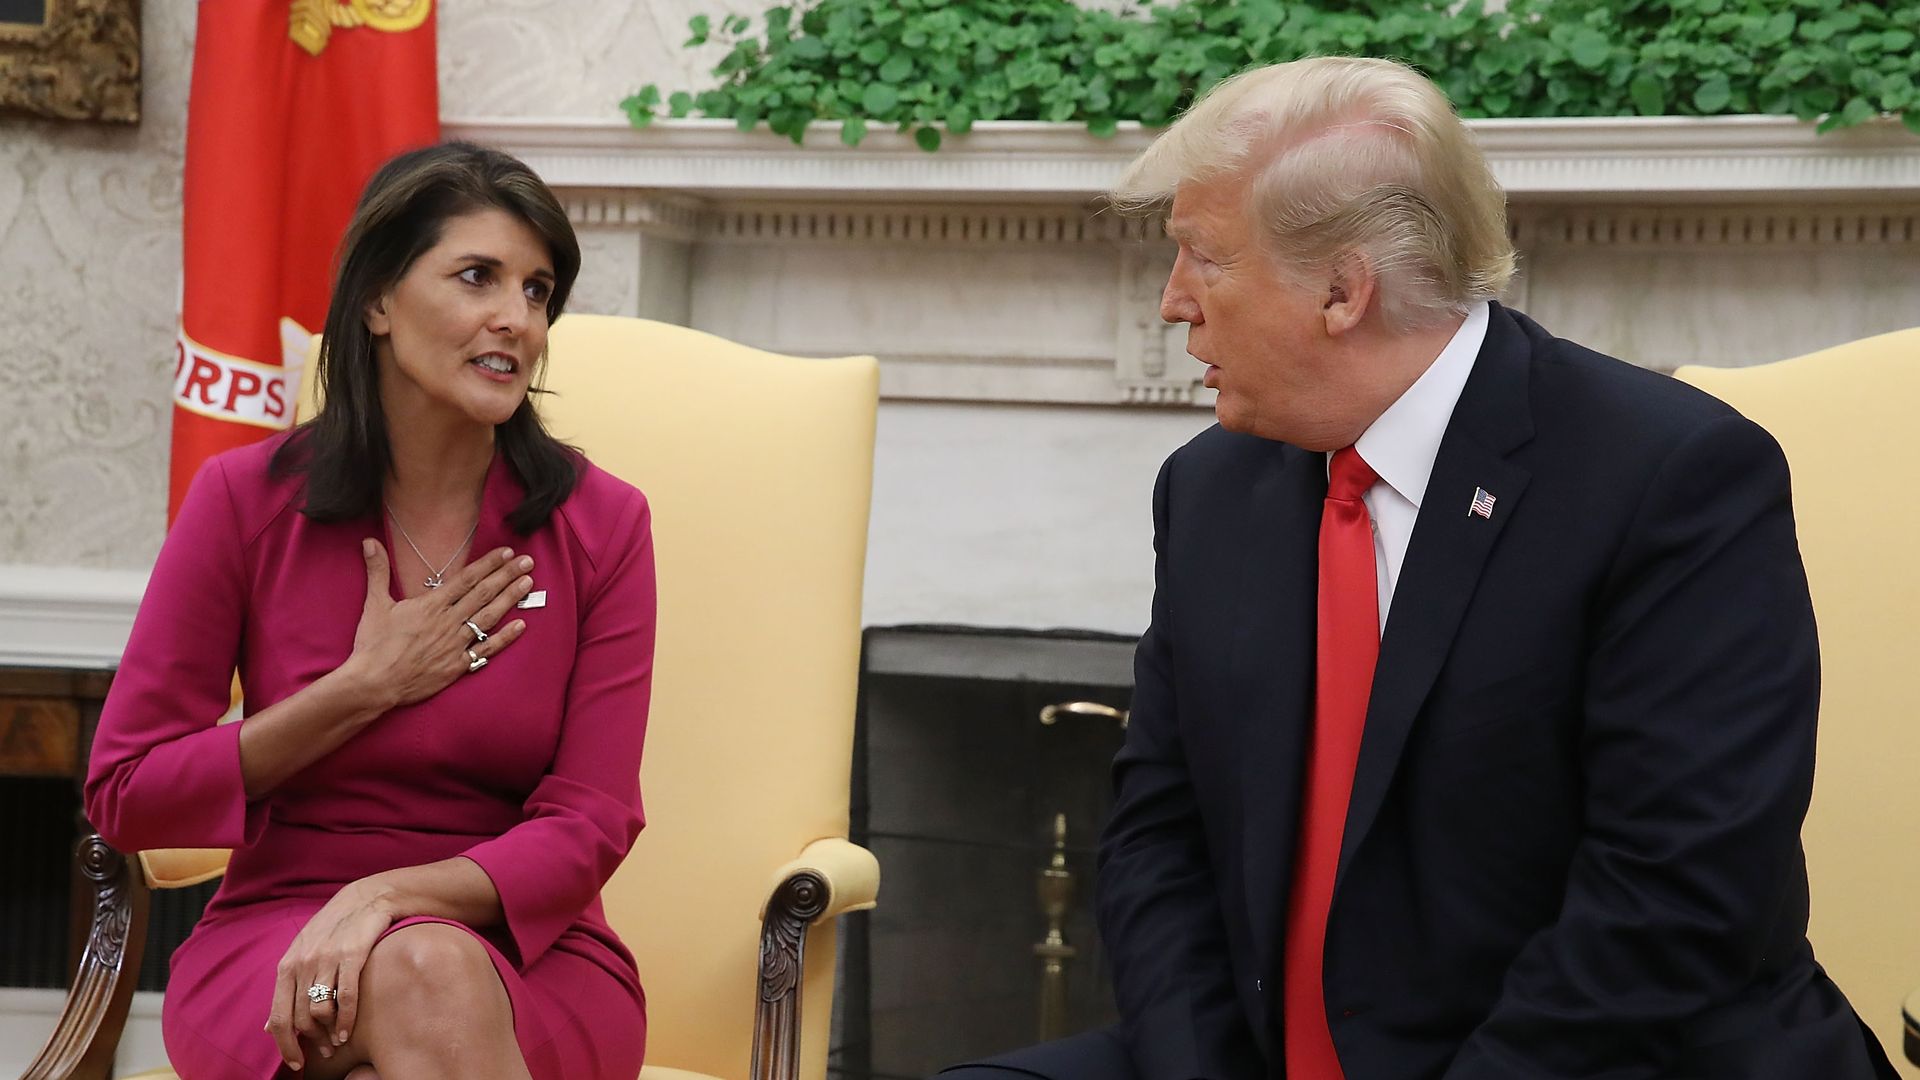 Trump: Nikki Haley donors will be barred from "MAGA camp"